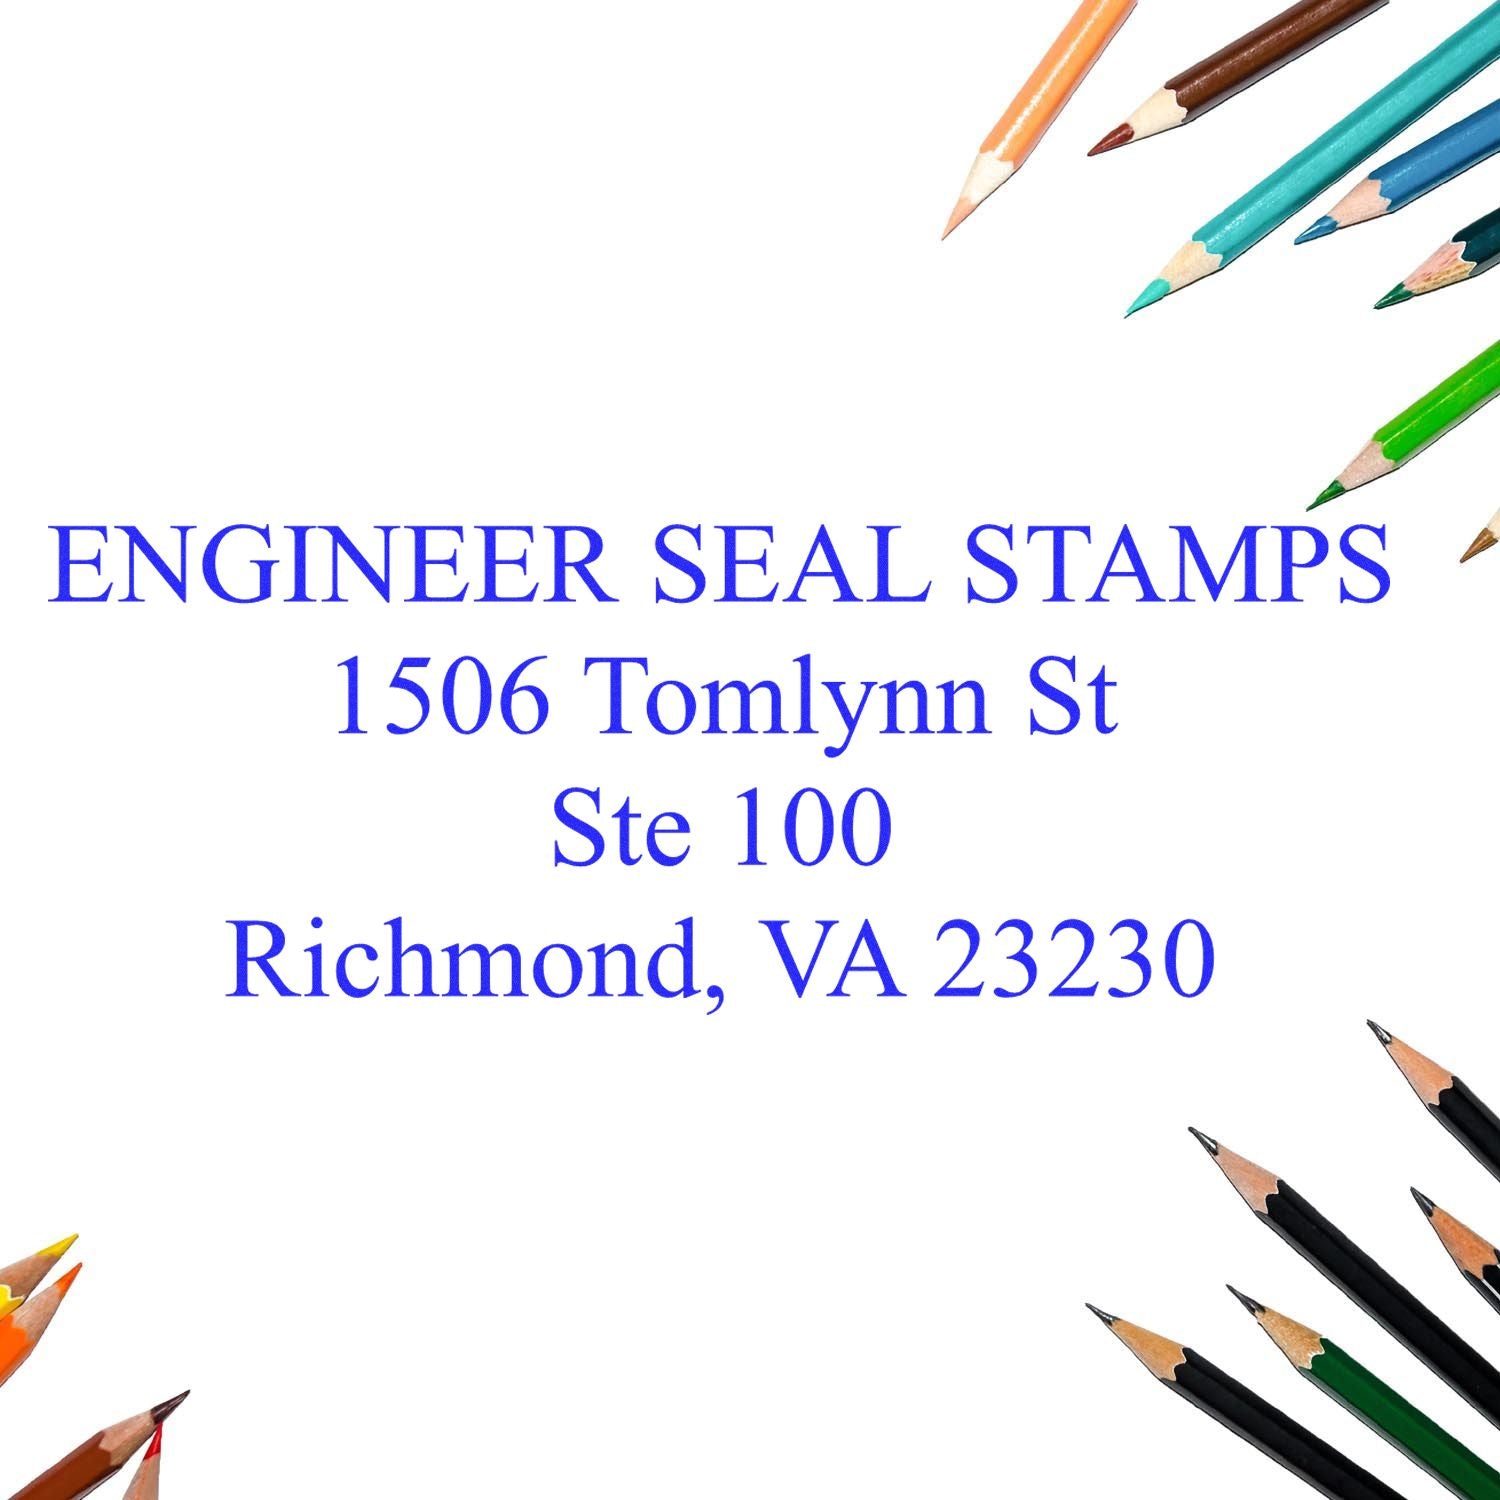 Add Flair to Your Mail: Stylish Return Address Stamps for Envelopes Feature Image